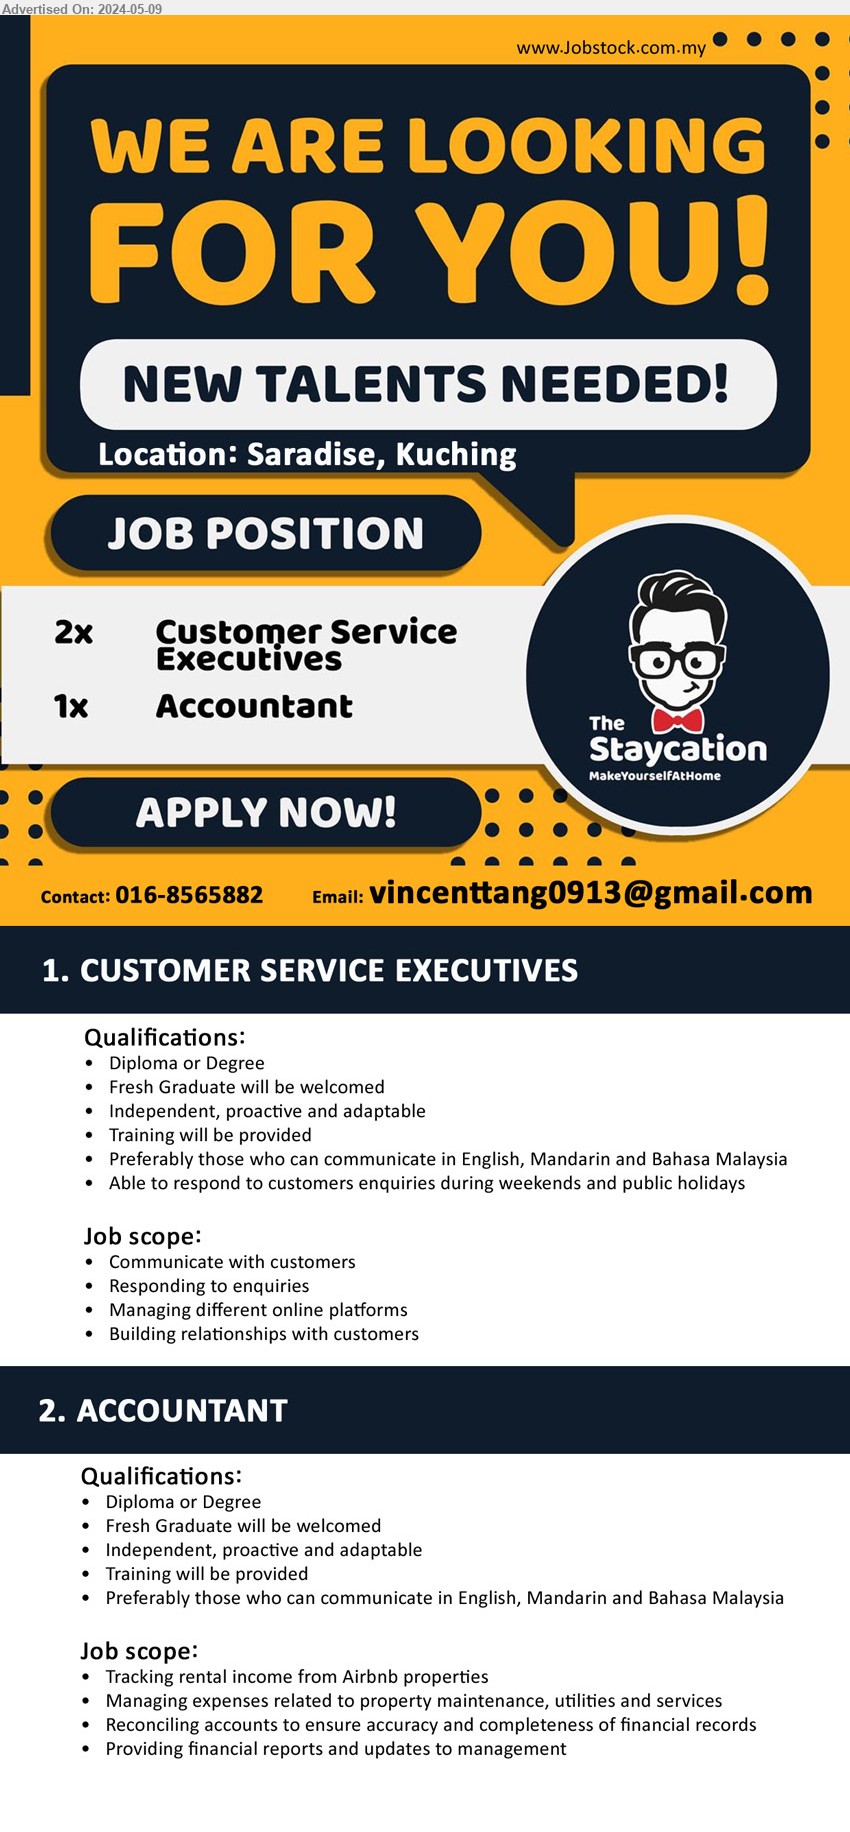 THE STAYCATION - 1. CUSTOMER SERVICE EXECUTIVES (Kuching), Diploma or Degree, Preferably those who can communicate in English, Mandarin and Bahasa Malaysia,...
2. ACCOUNTANT (Kuching), Diploma or Degree, tracking rental income from Airbnb properties, Managing expenses related to property maintenance, utilities and services...
Call 016-8565882 / Email resume to ...